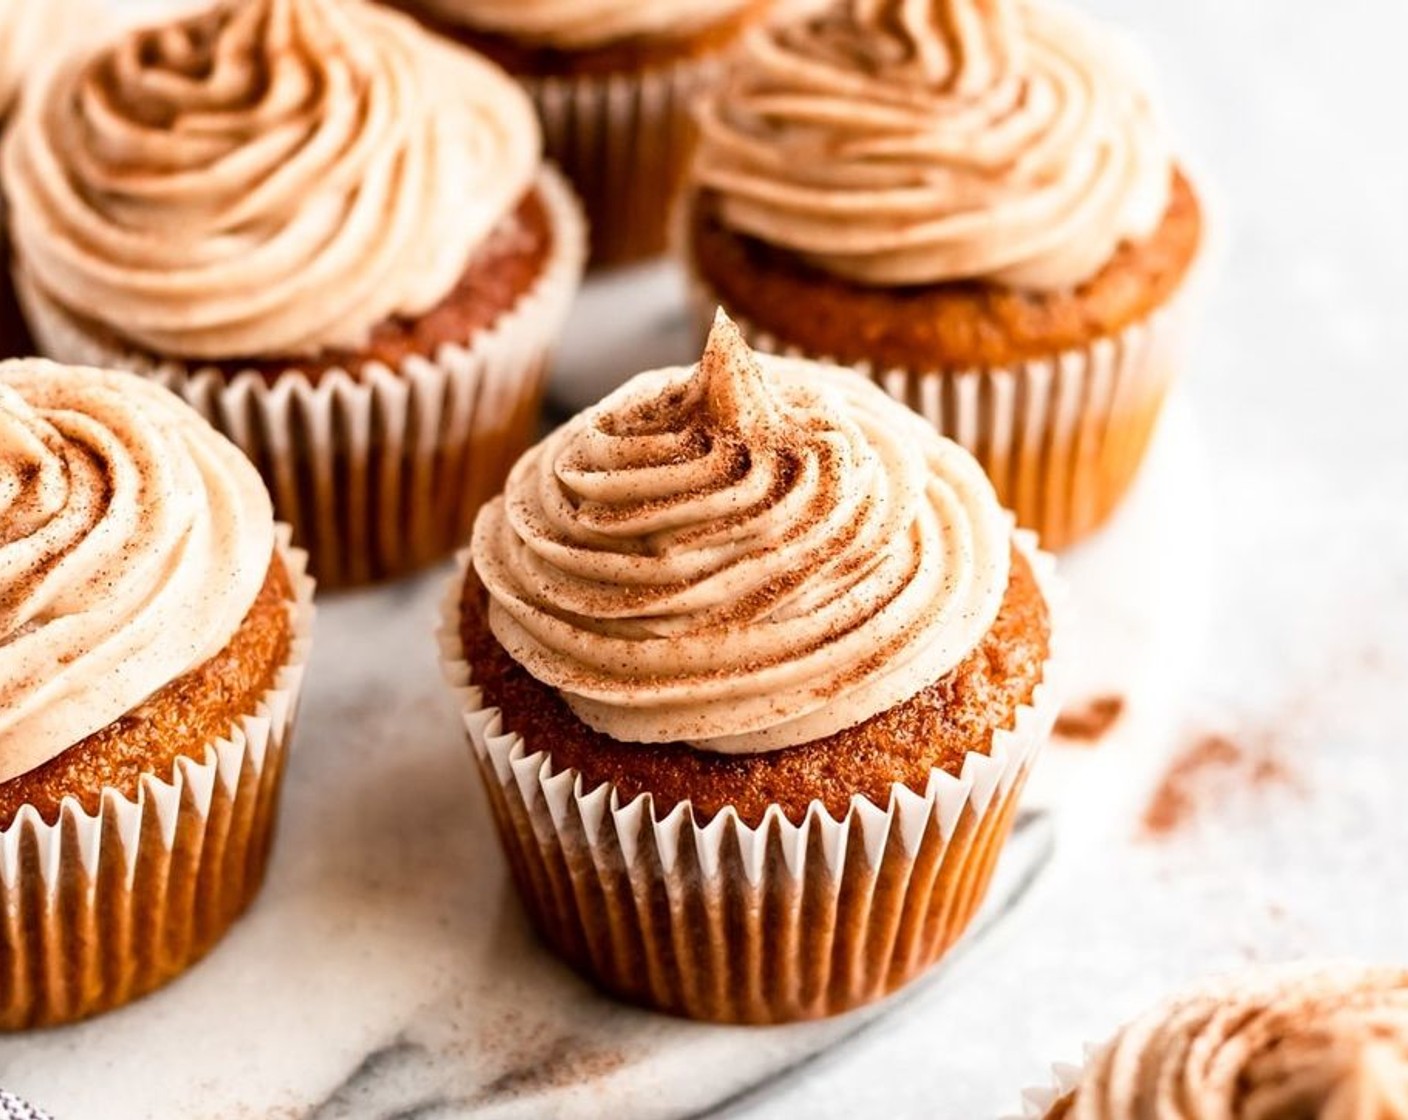 step 11 Cupcakes will keep well at room temperature for 4-6 hours. Refrigerate for up to 4 days.